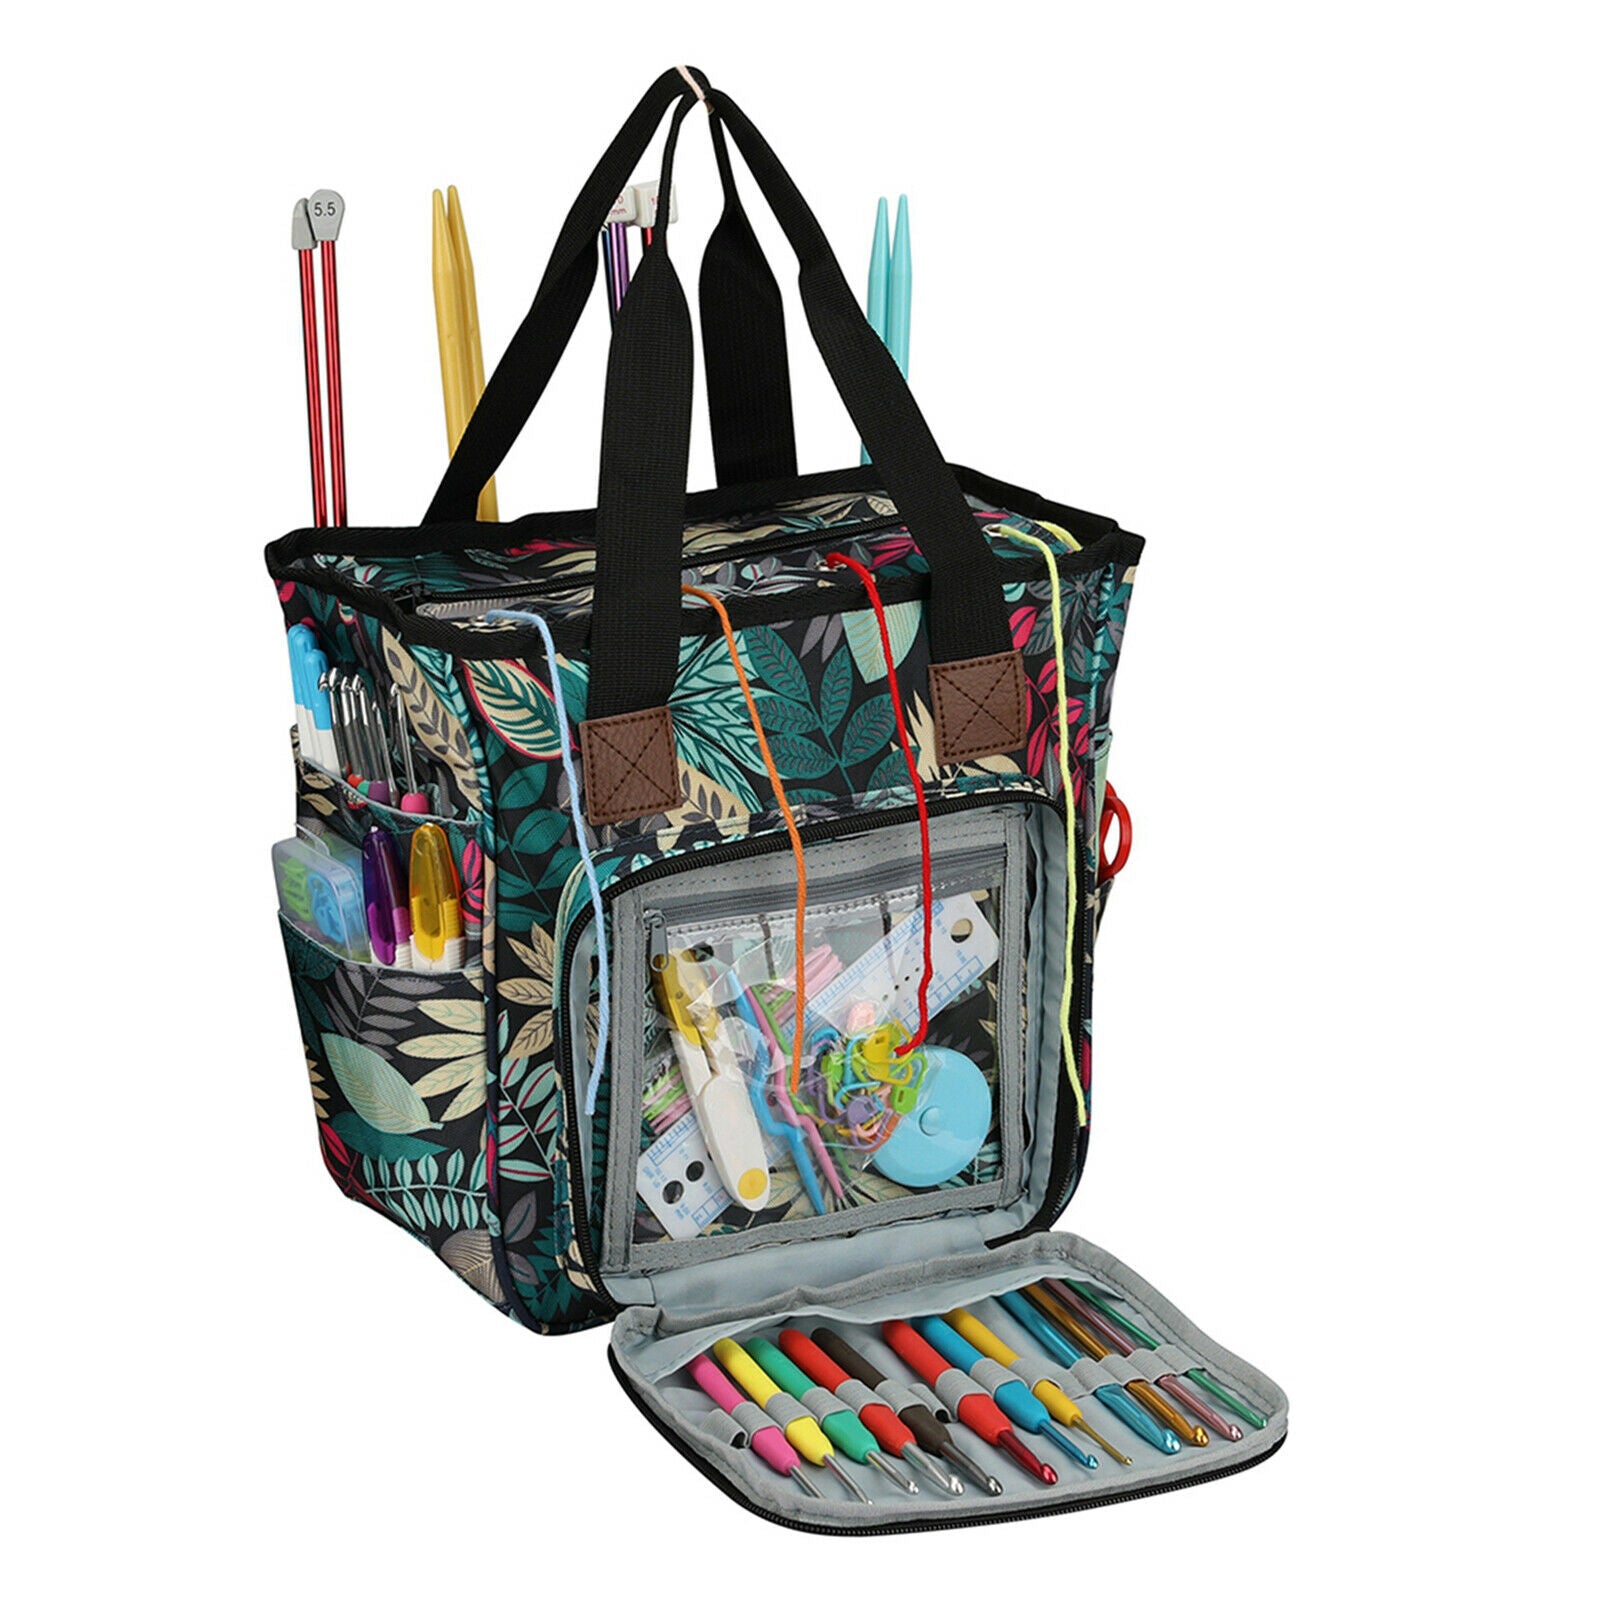 Yarn Storage Tote,  Free with Divider, Knitting and Crochet Organizer,